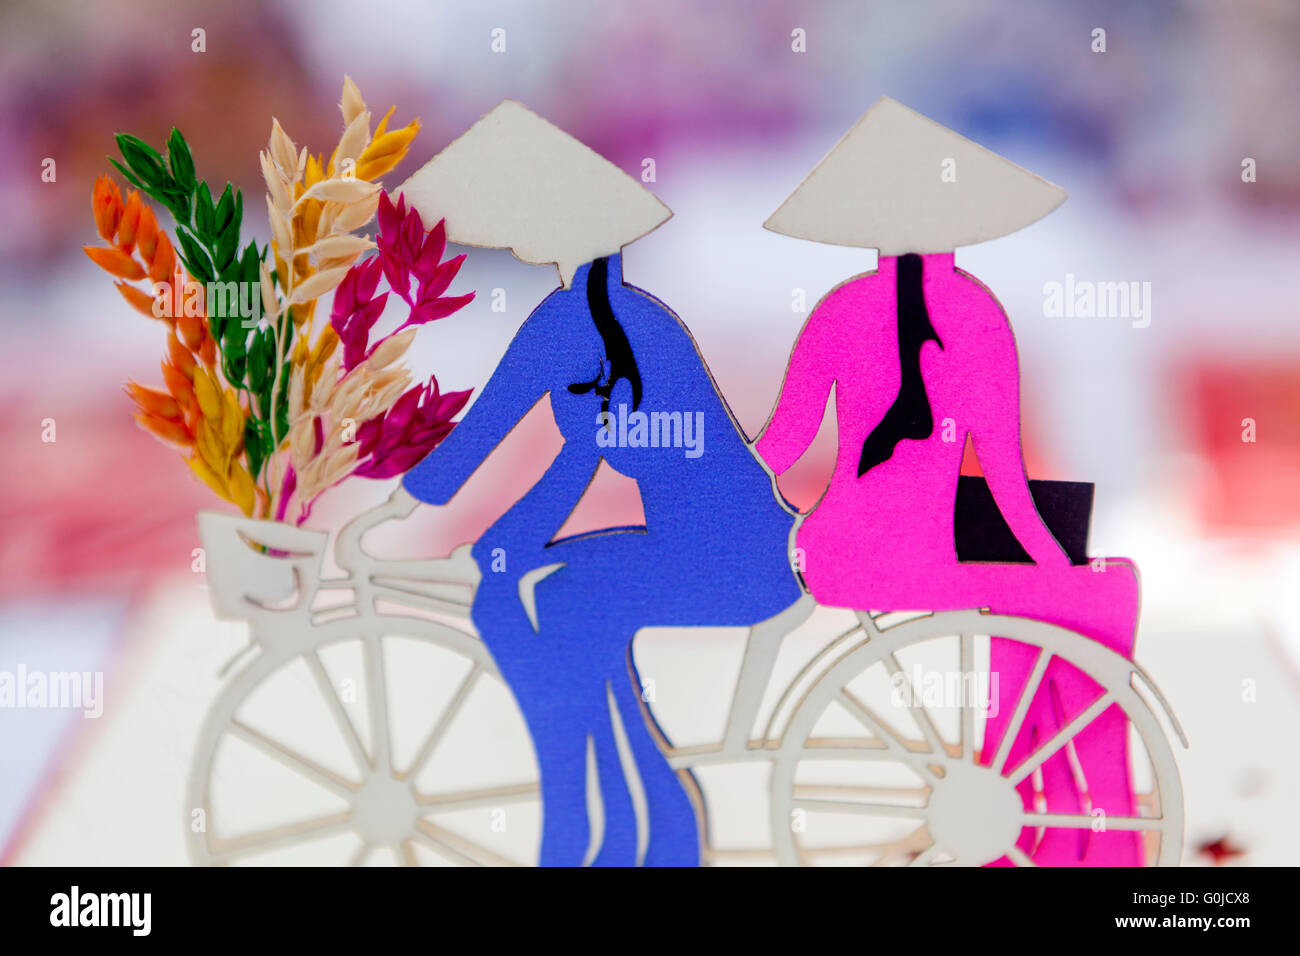 Vietnamese motif of women riding a bike and carrying flowers to the market Stock Photo